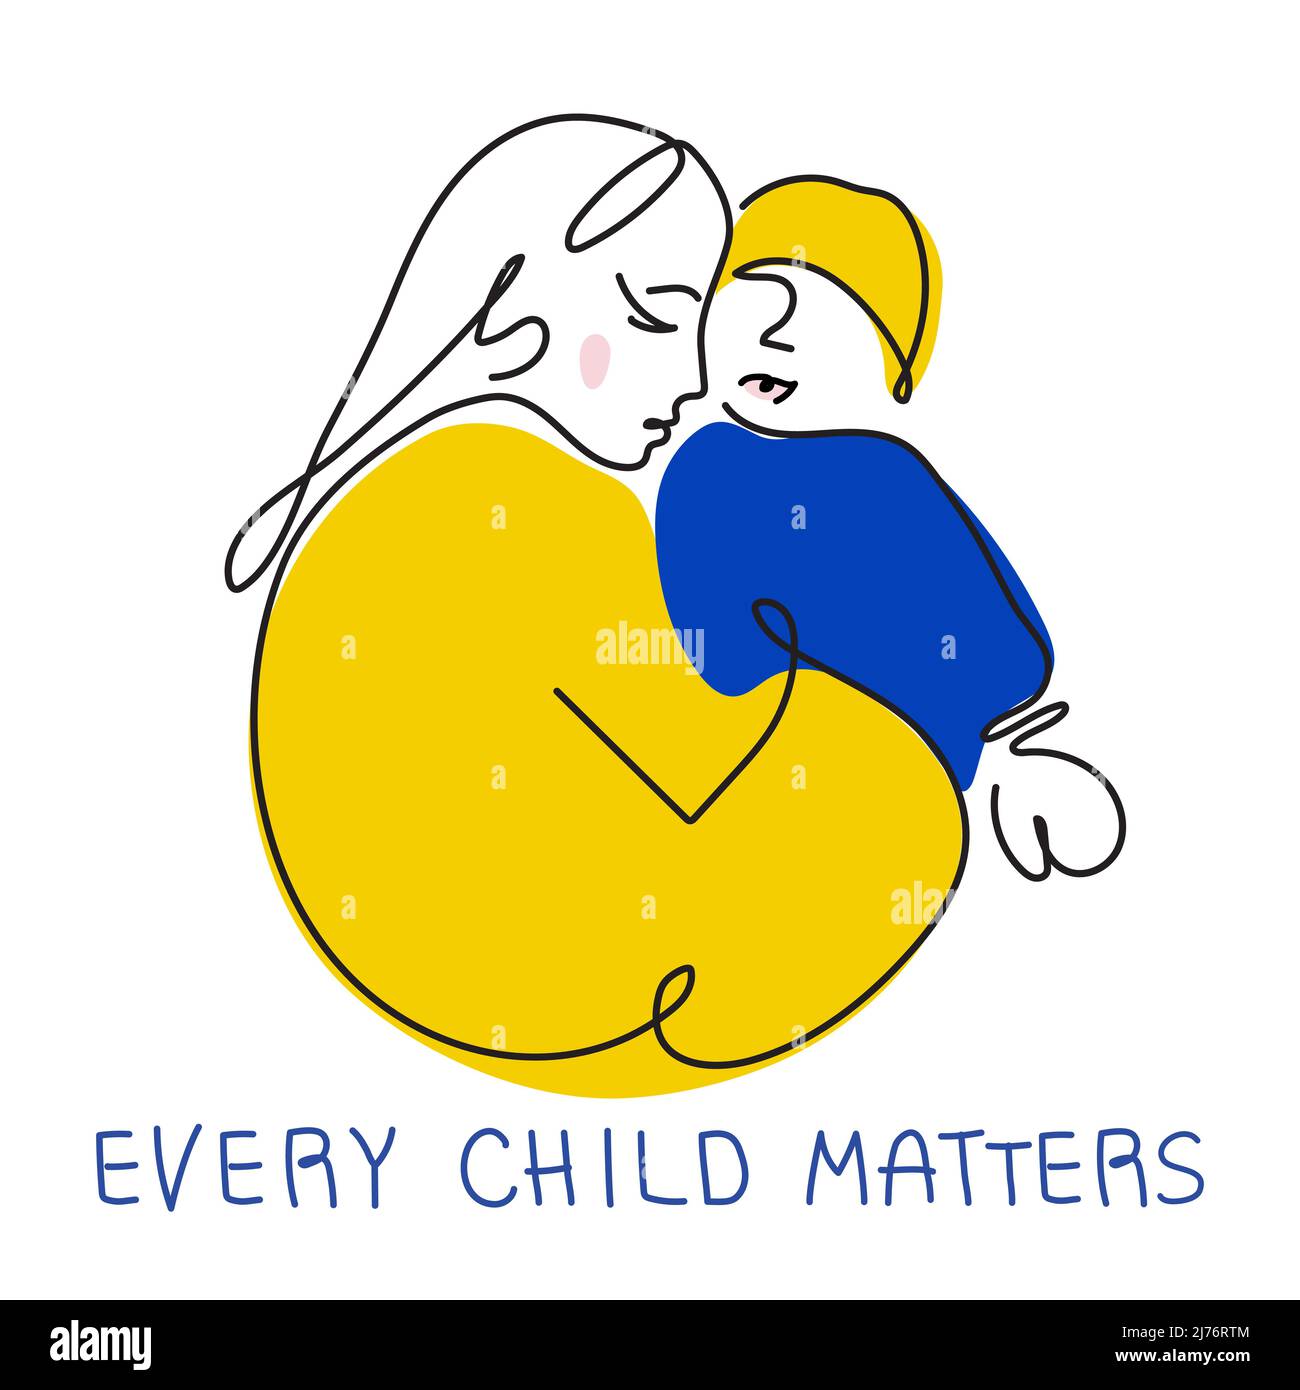 Every child matters Royalty Free Vector Image - VectorStock